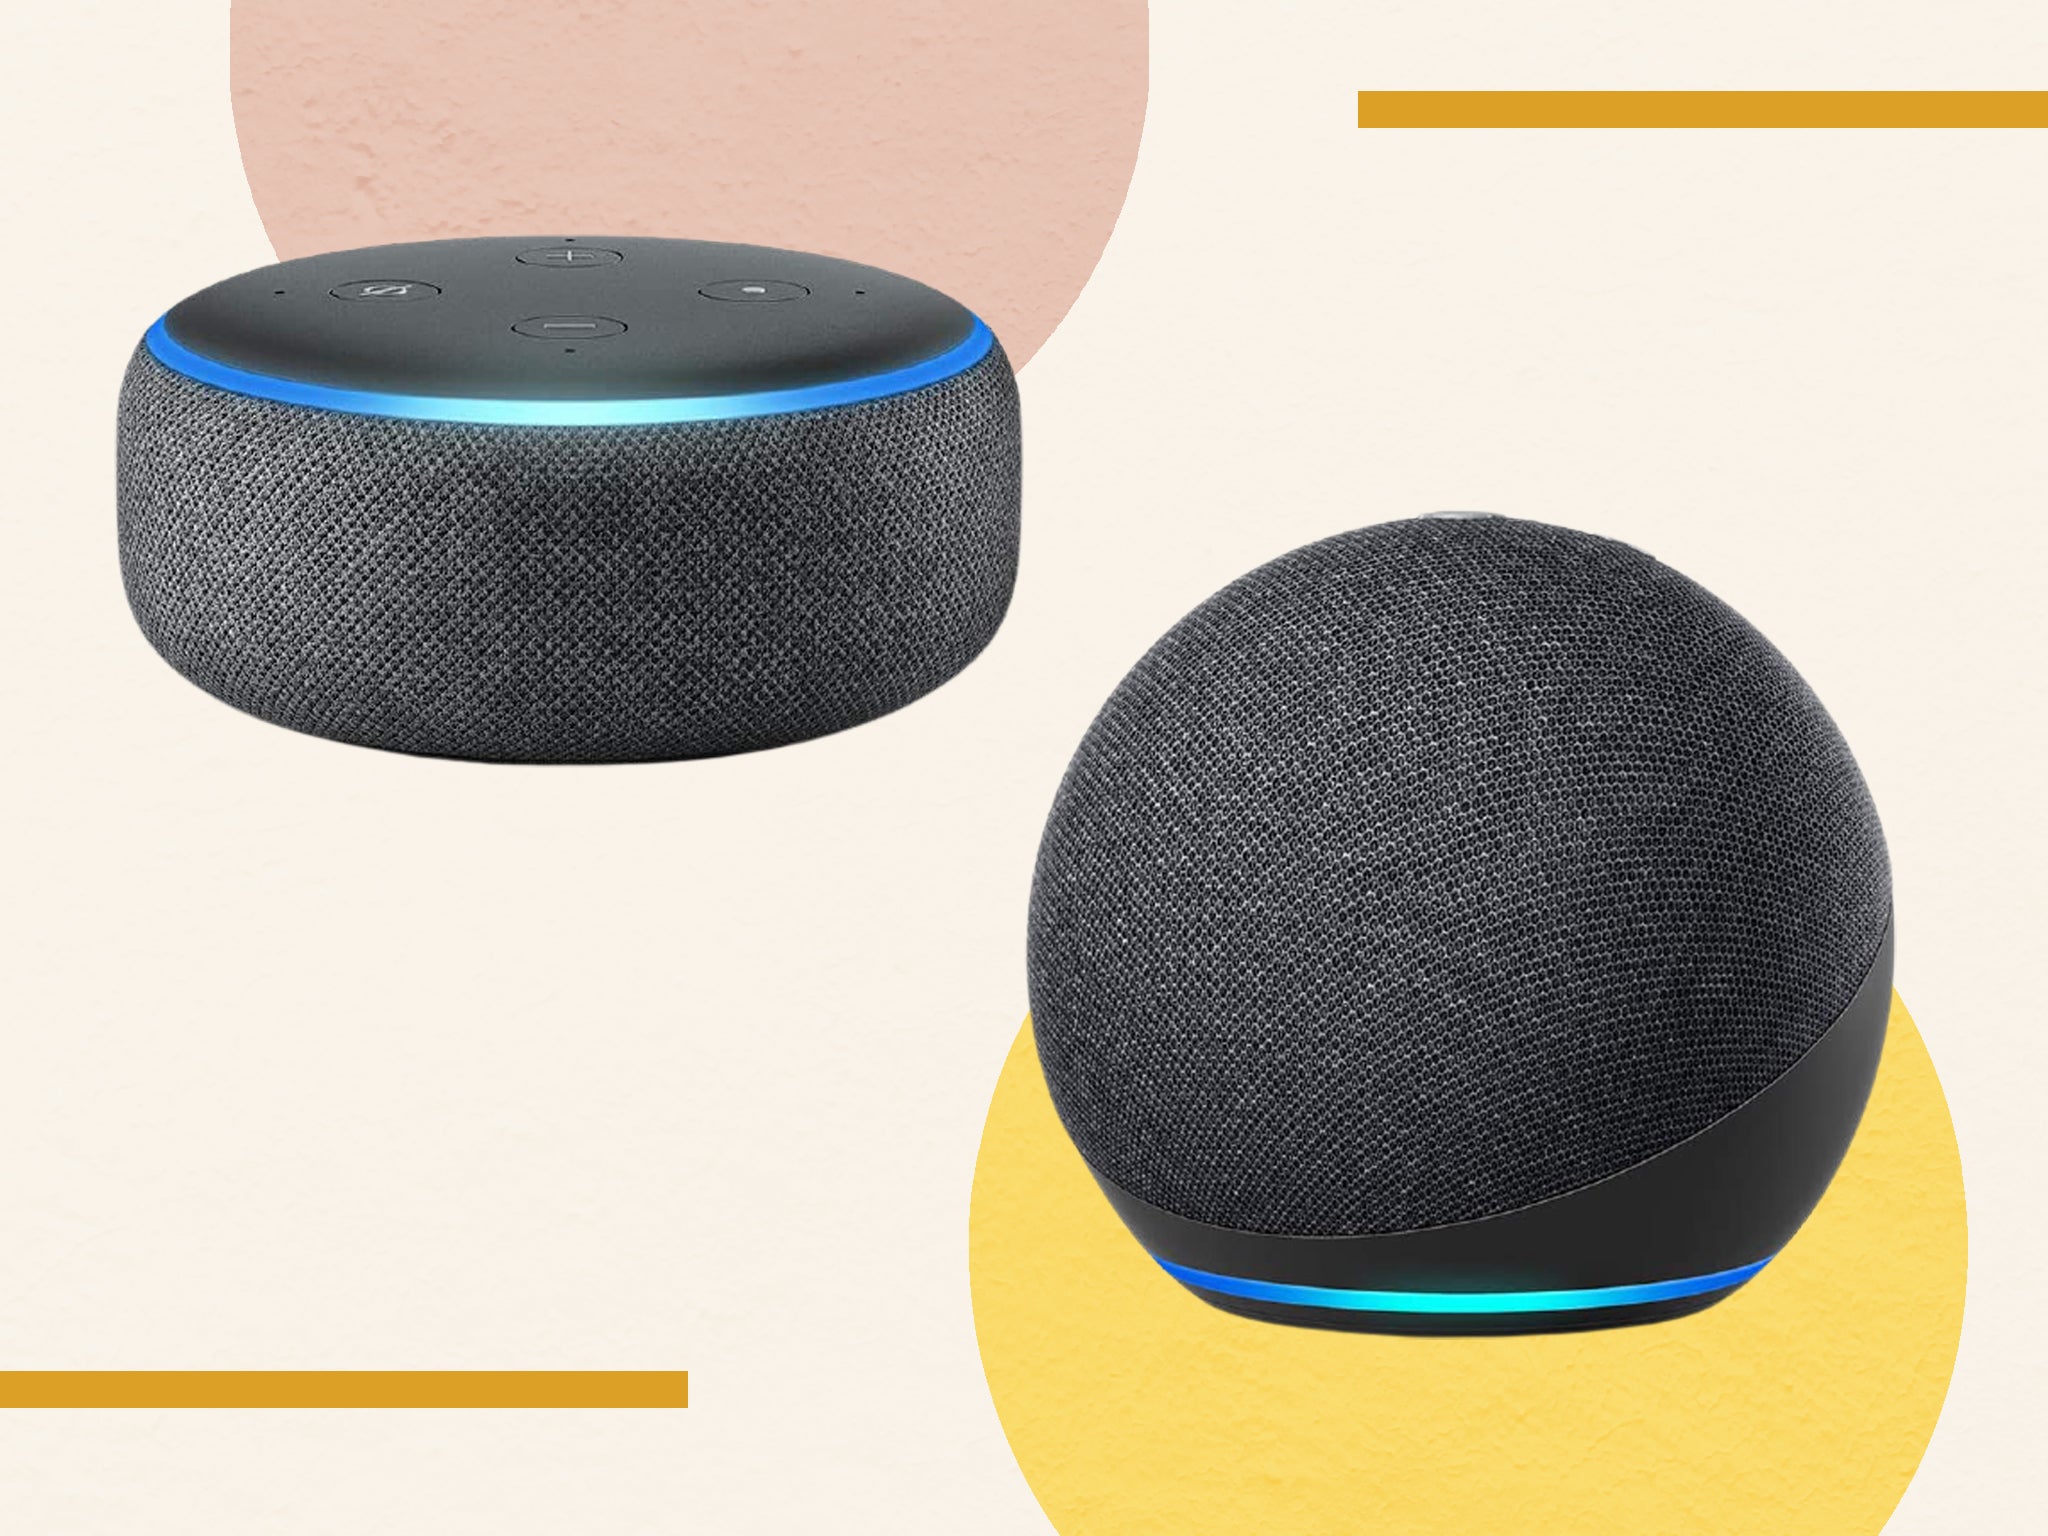 Black Friday is already here with this huge Echo Dot with Clock saving